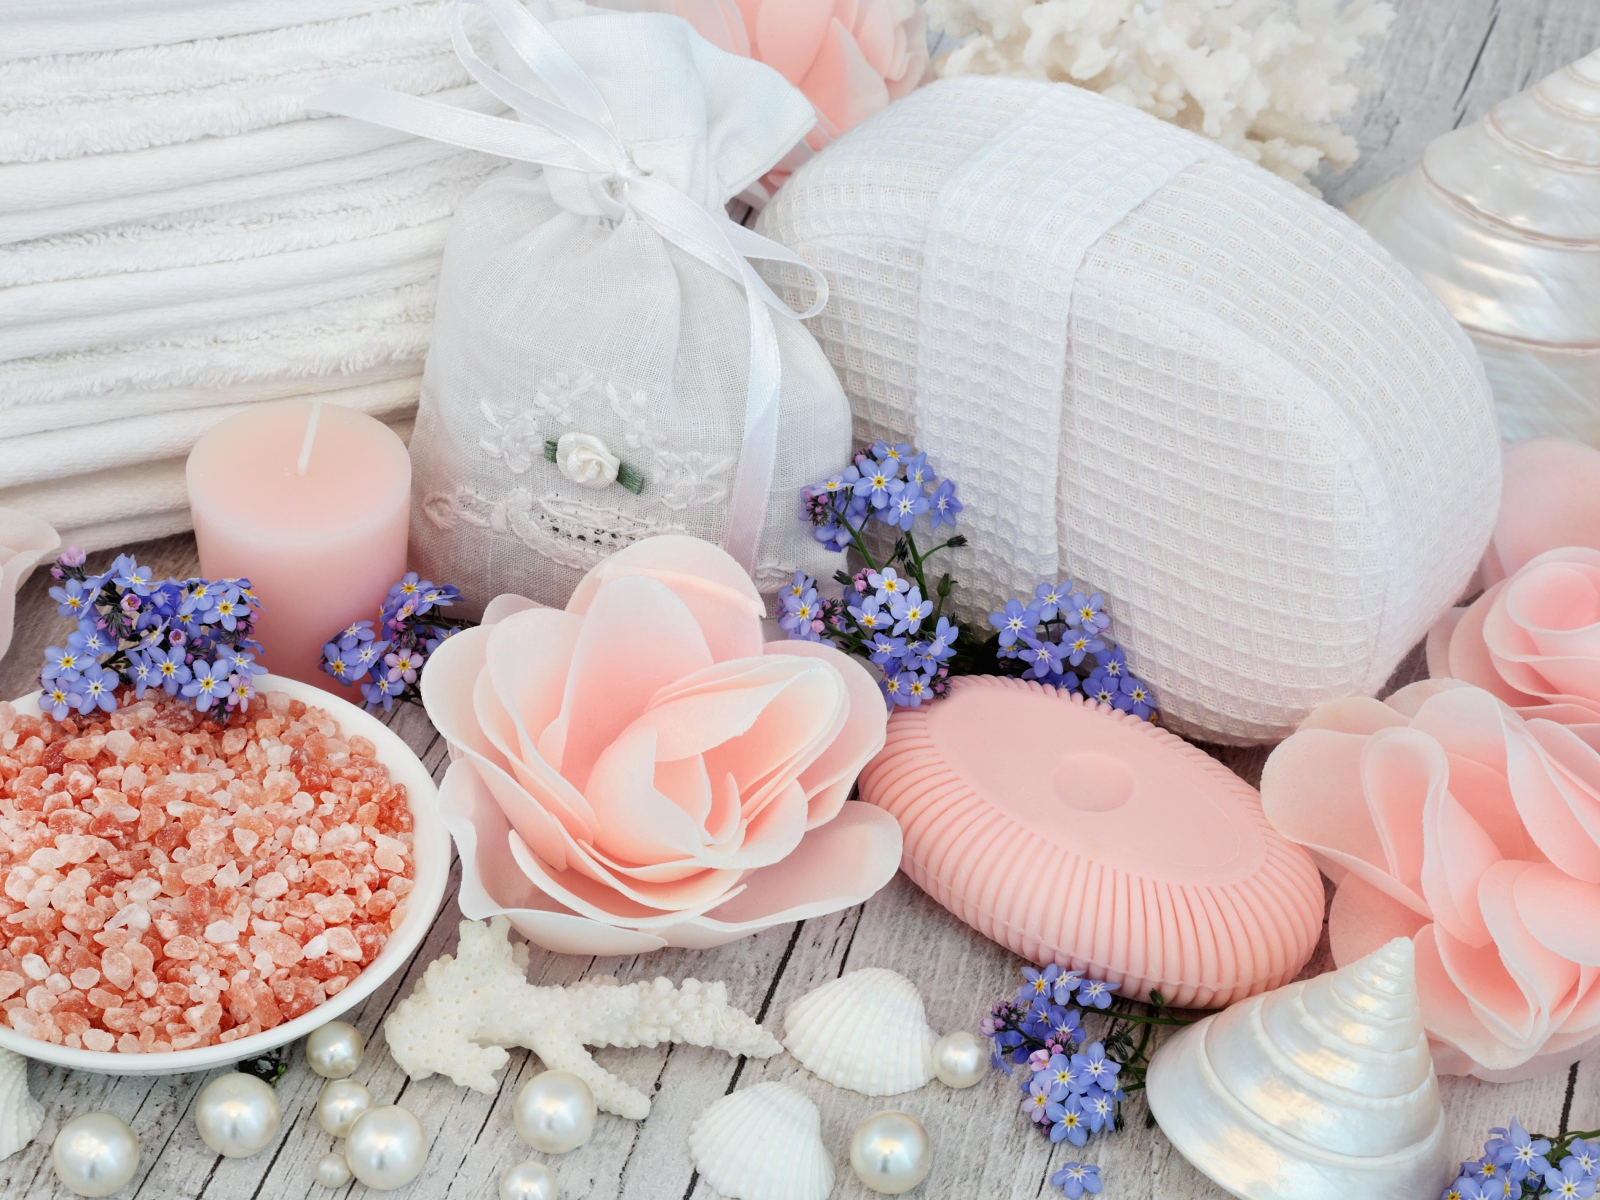 Fragrant salt, soap, candles and spa accessories